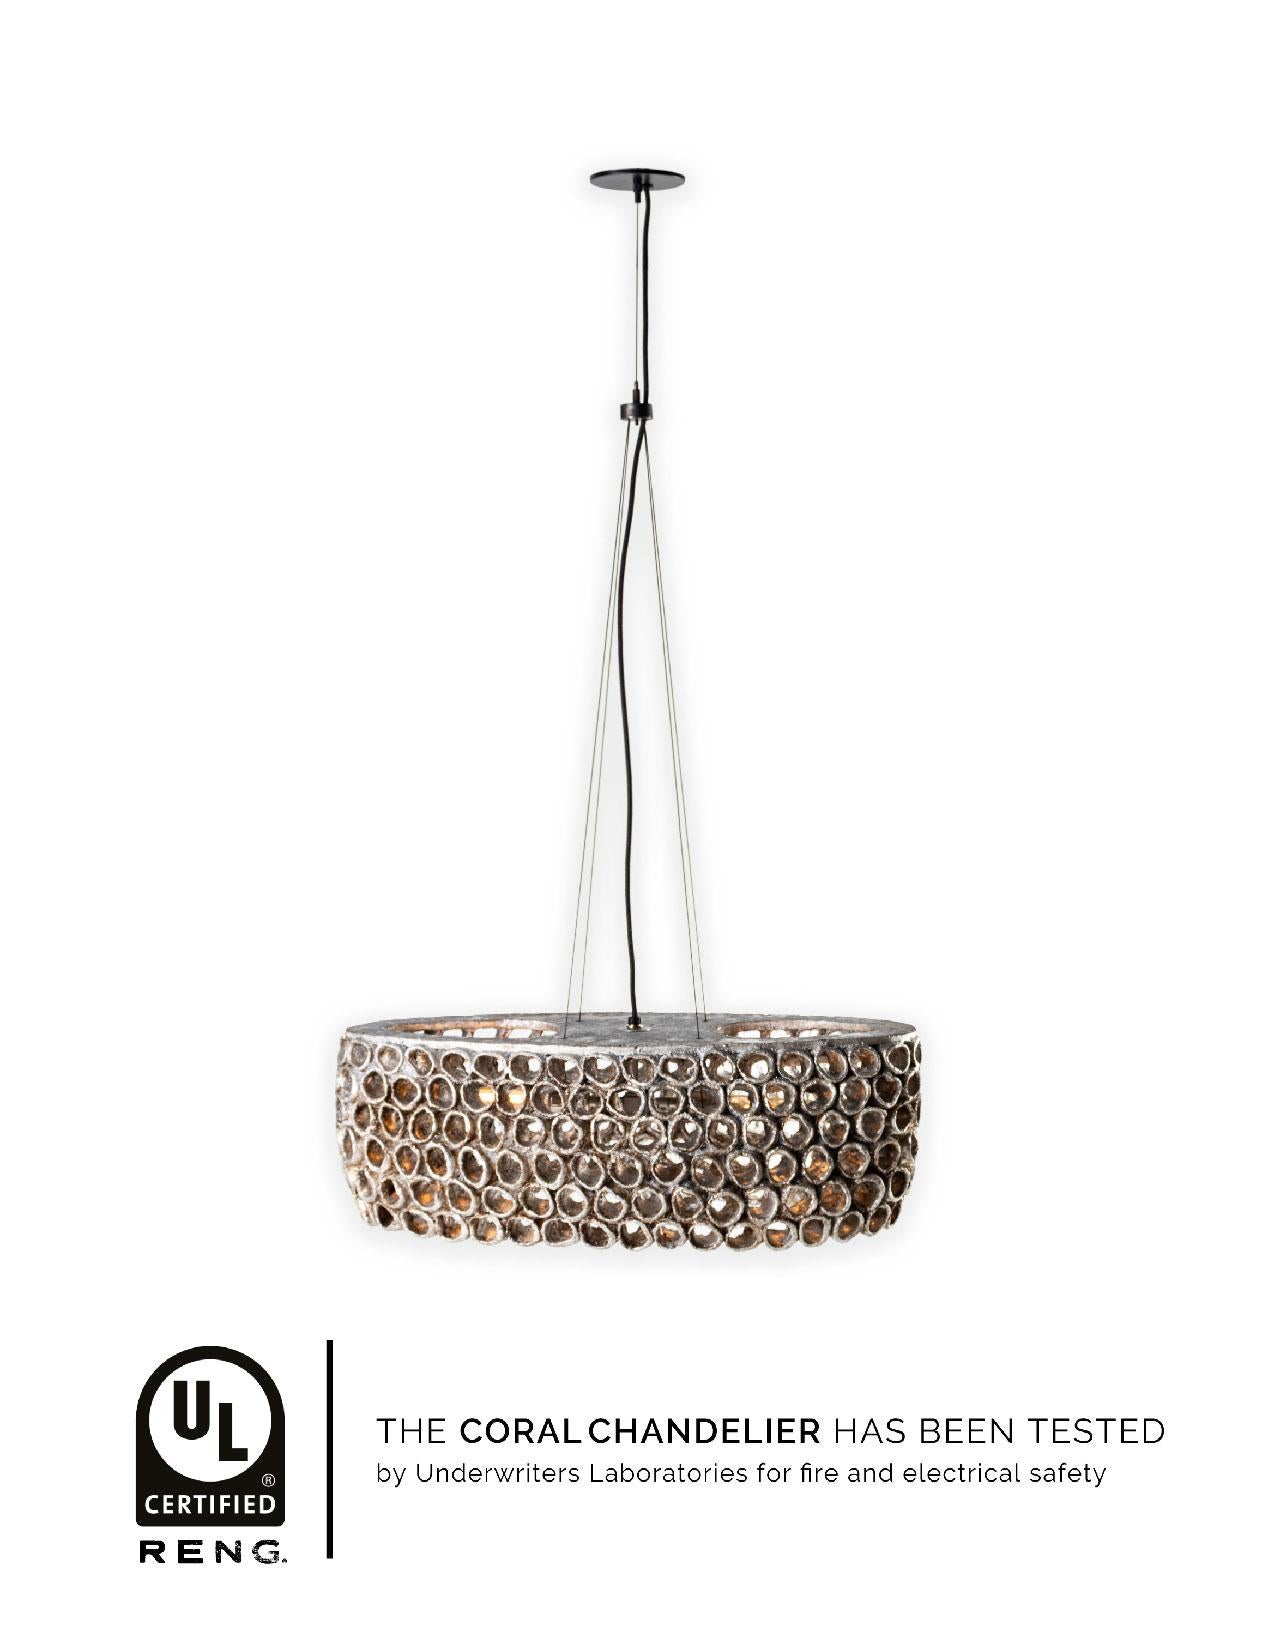 RENG, Coral, Hand Formed Ceramic, Perforated Oceanic Inspired Chandelier  3